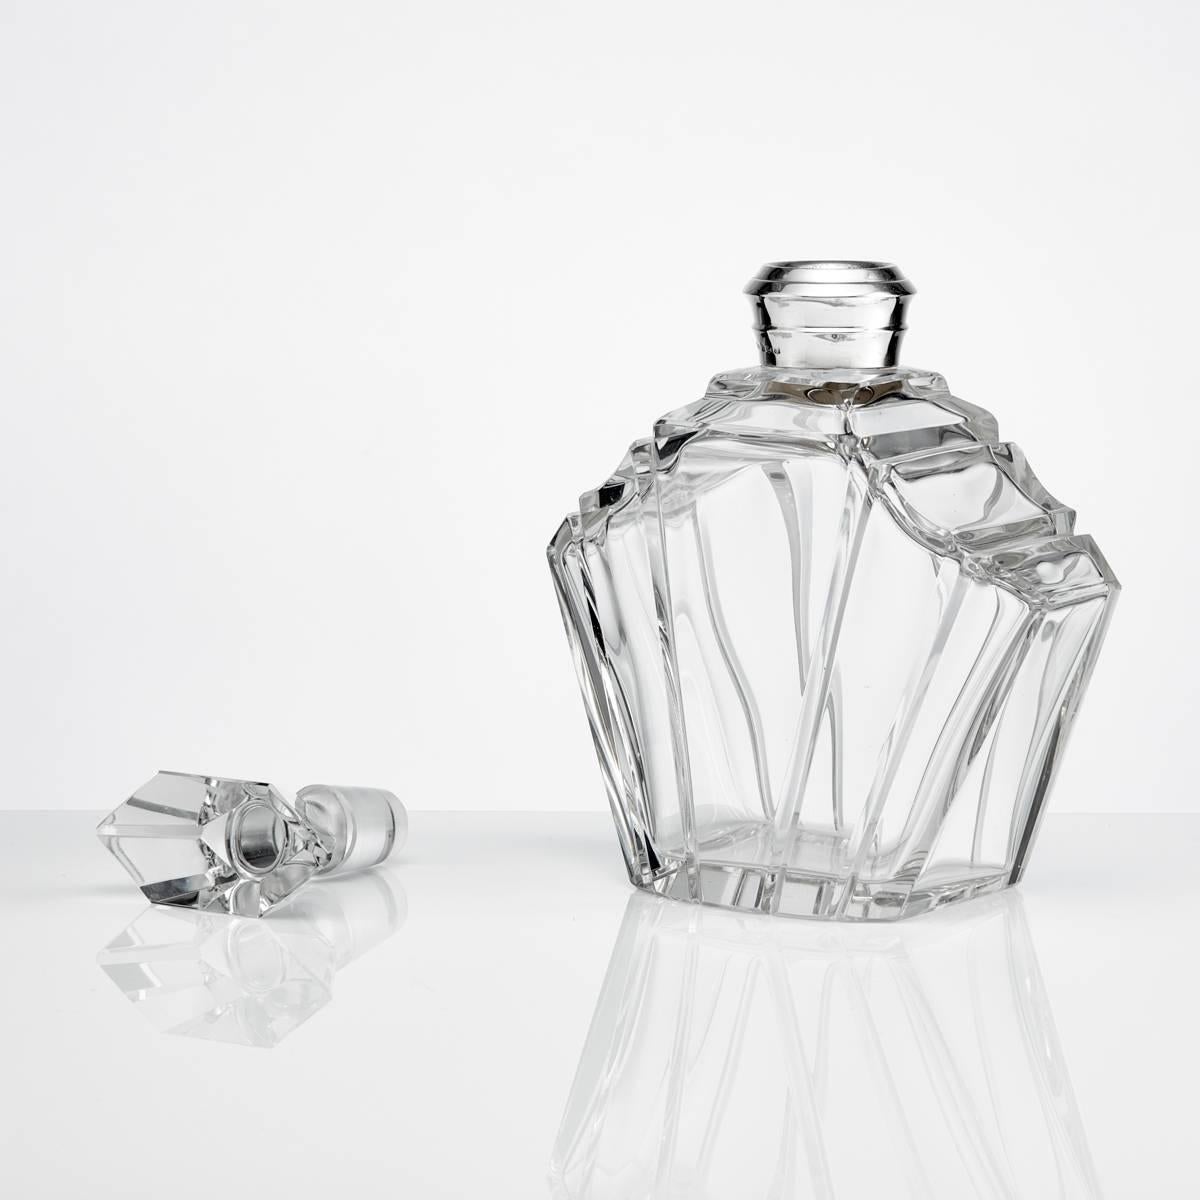 English A Art Deco Sterling Silver Mounted Decanter by Walker & Hall Birmingham, 1938